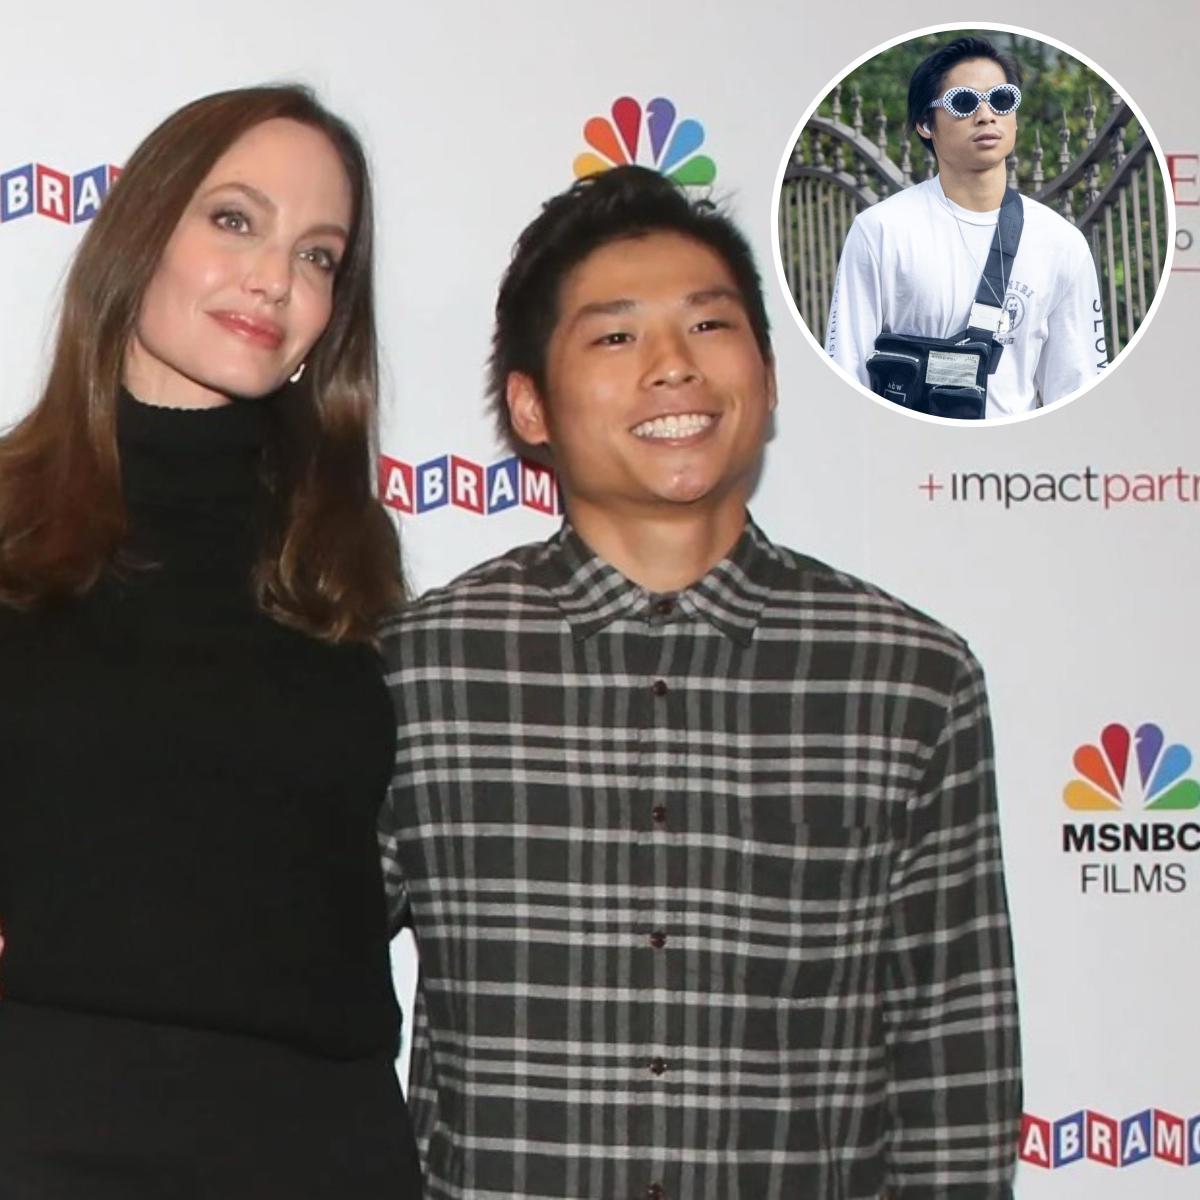 Angelina Jolie enjoys valuable family moments in NYC with son Pax